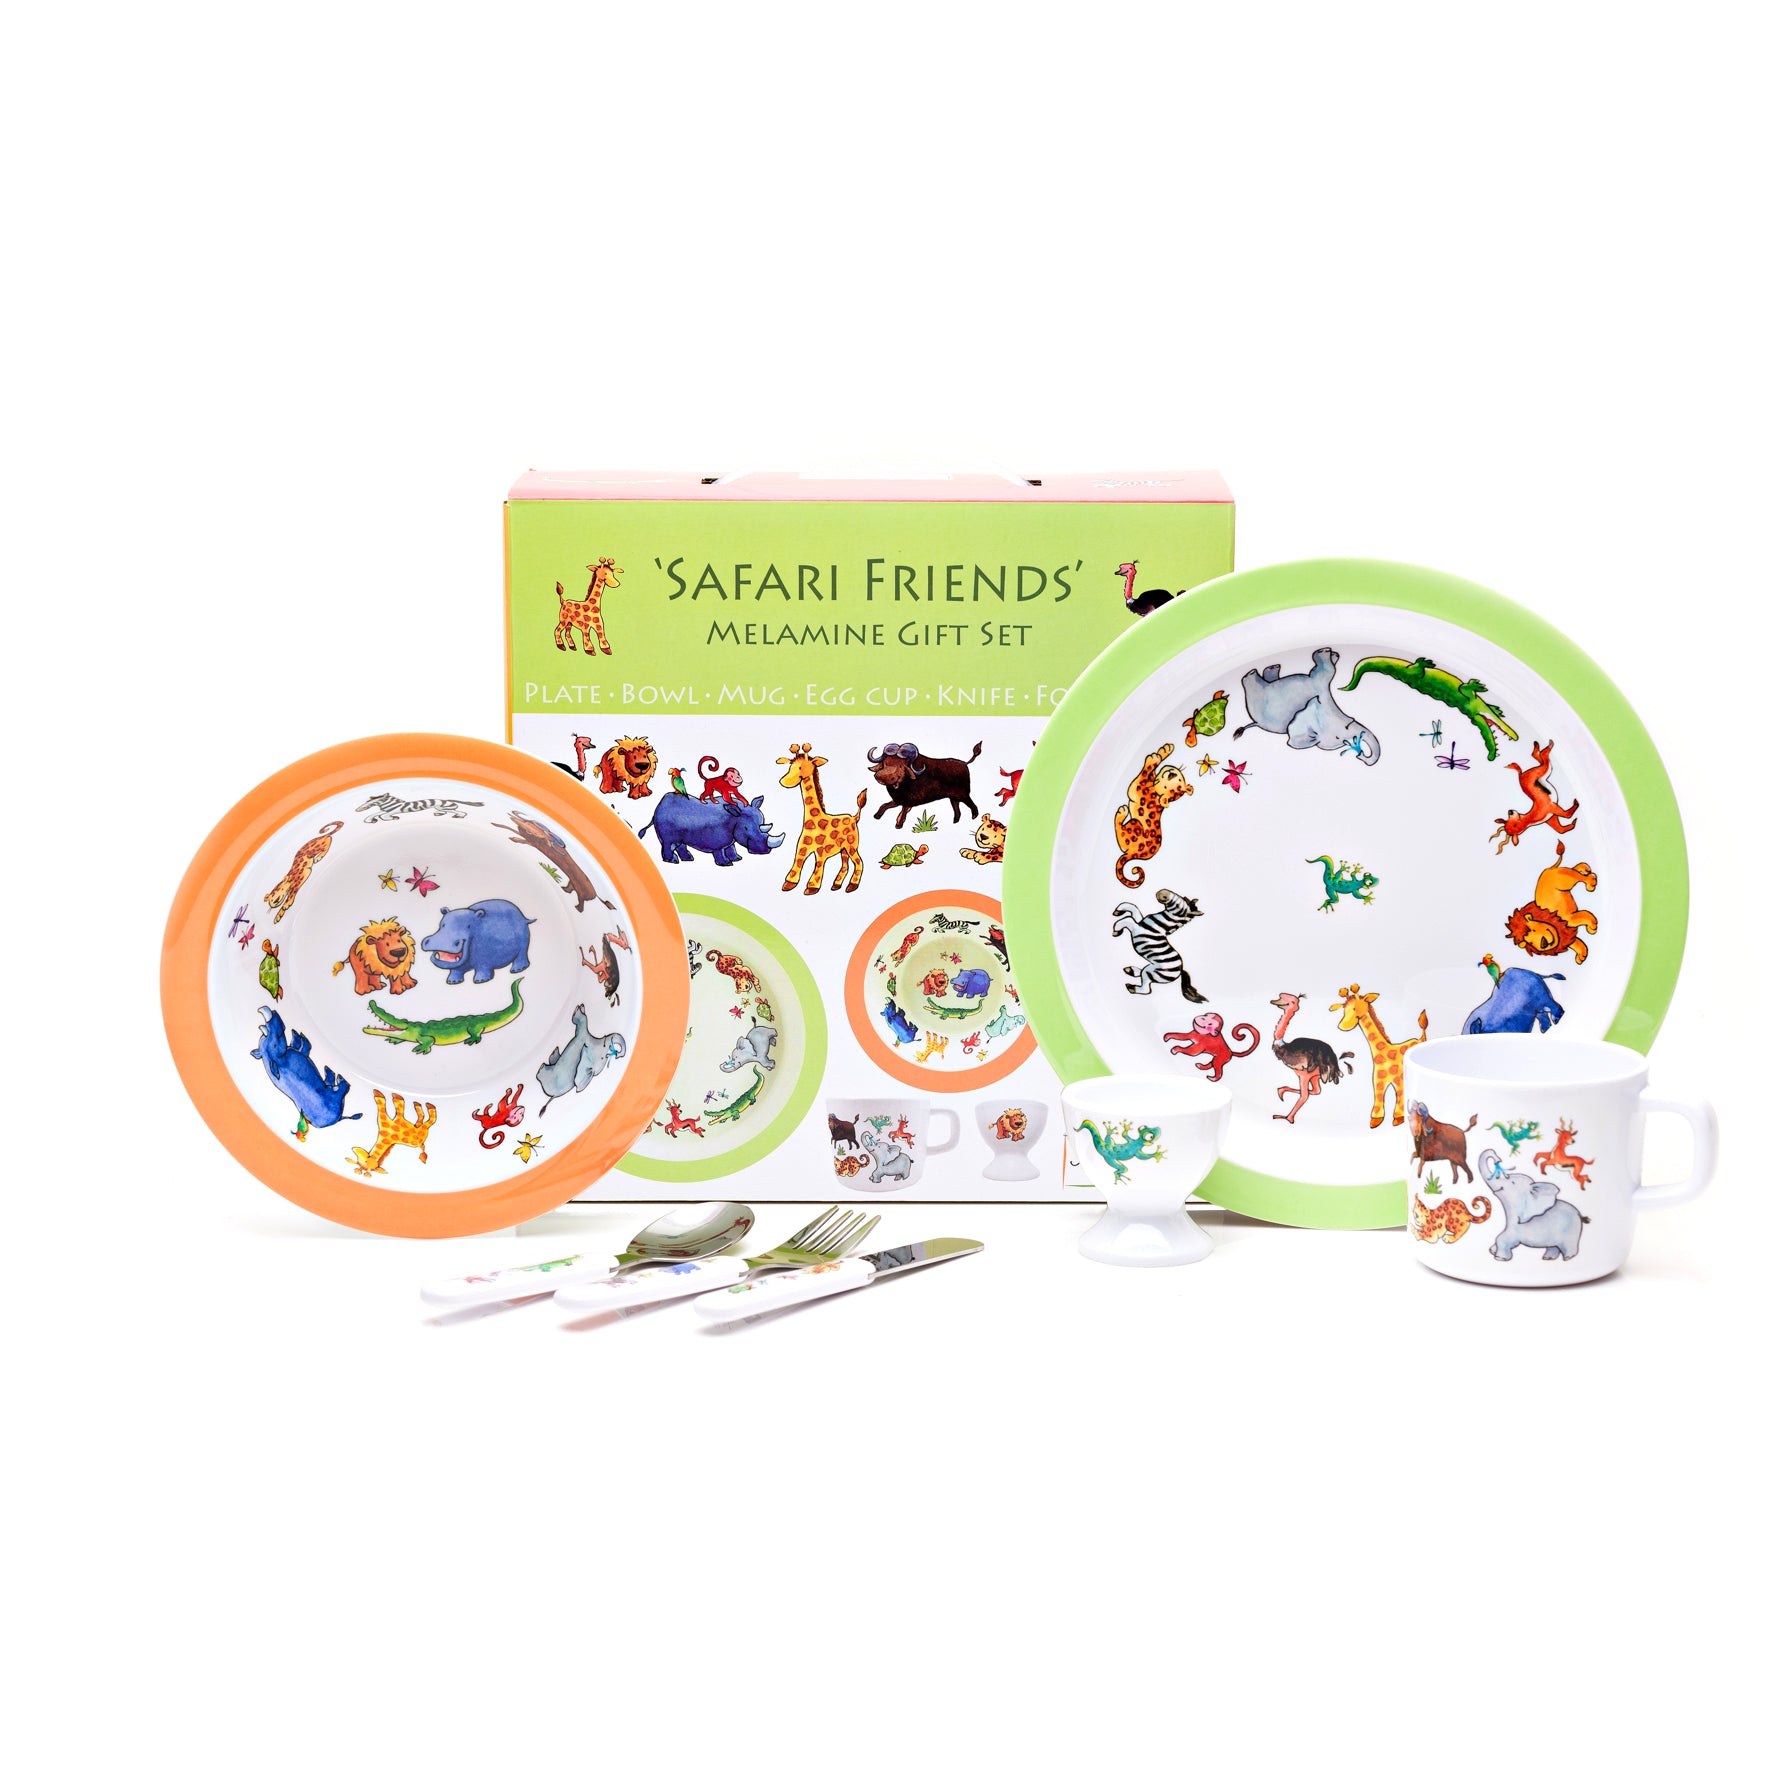 Safari themed melamine dining plate set.  The animals will help keep a little one entertained at meal times.